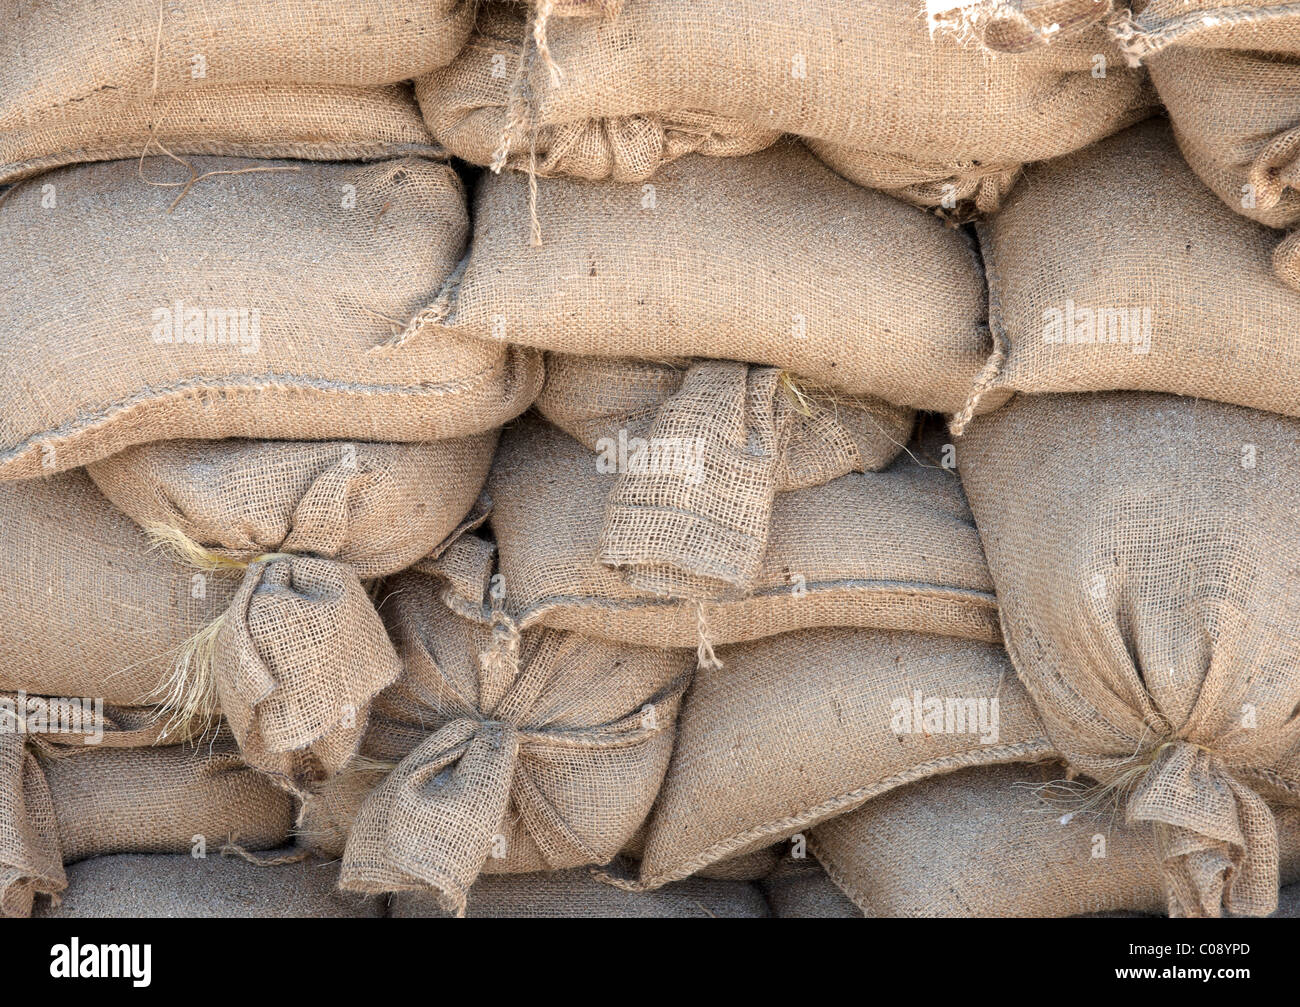 lots of sandbags all piled ready and waiting Stock Photo